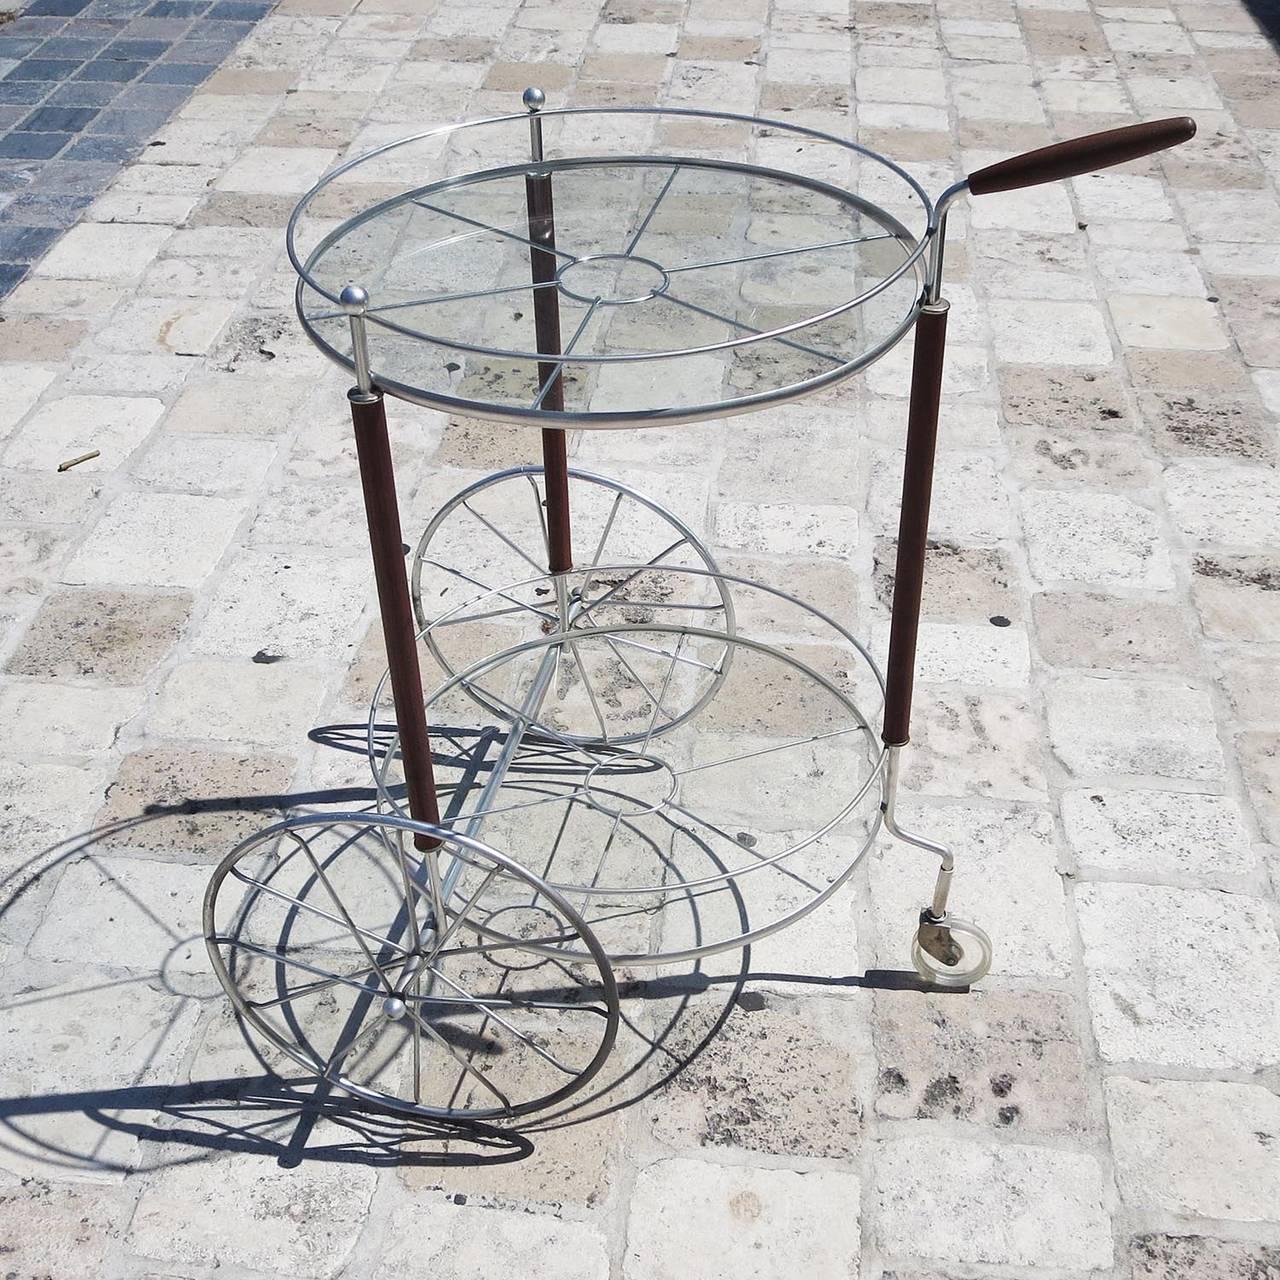 RETIREMENT SALE!!!  EVERYTHING MUST GO - CHECK OUT OUR OTHER ITEMS.				

This circular trolley with its oversized wheels is a great play on proportion, indeed. All metals are silver painted, contrasting with darkened and polished mahogany accents.